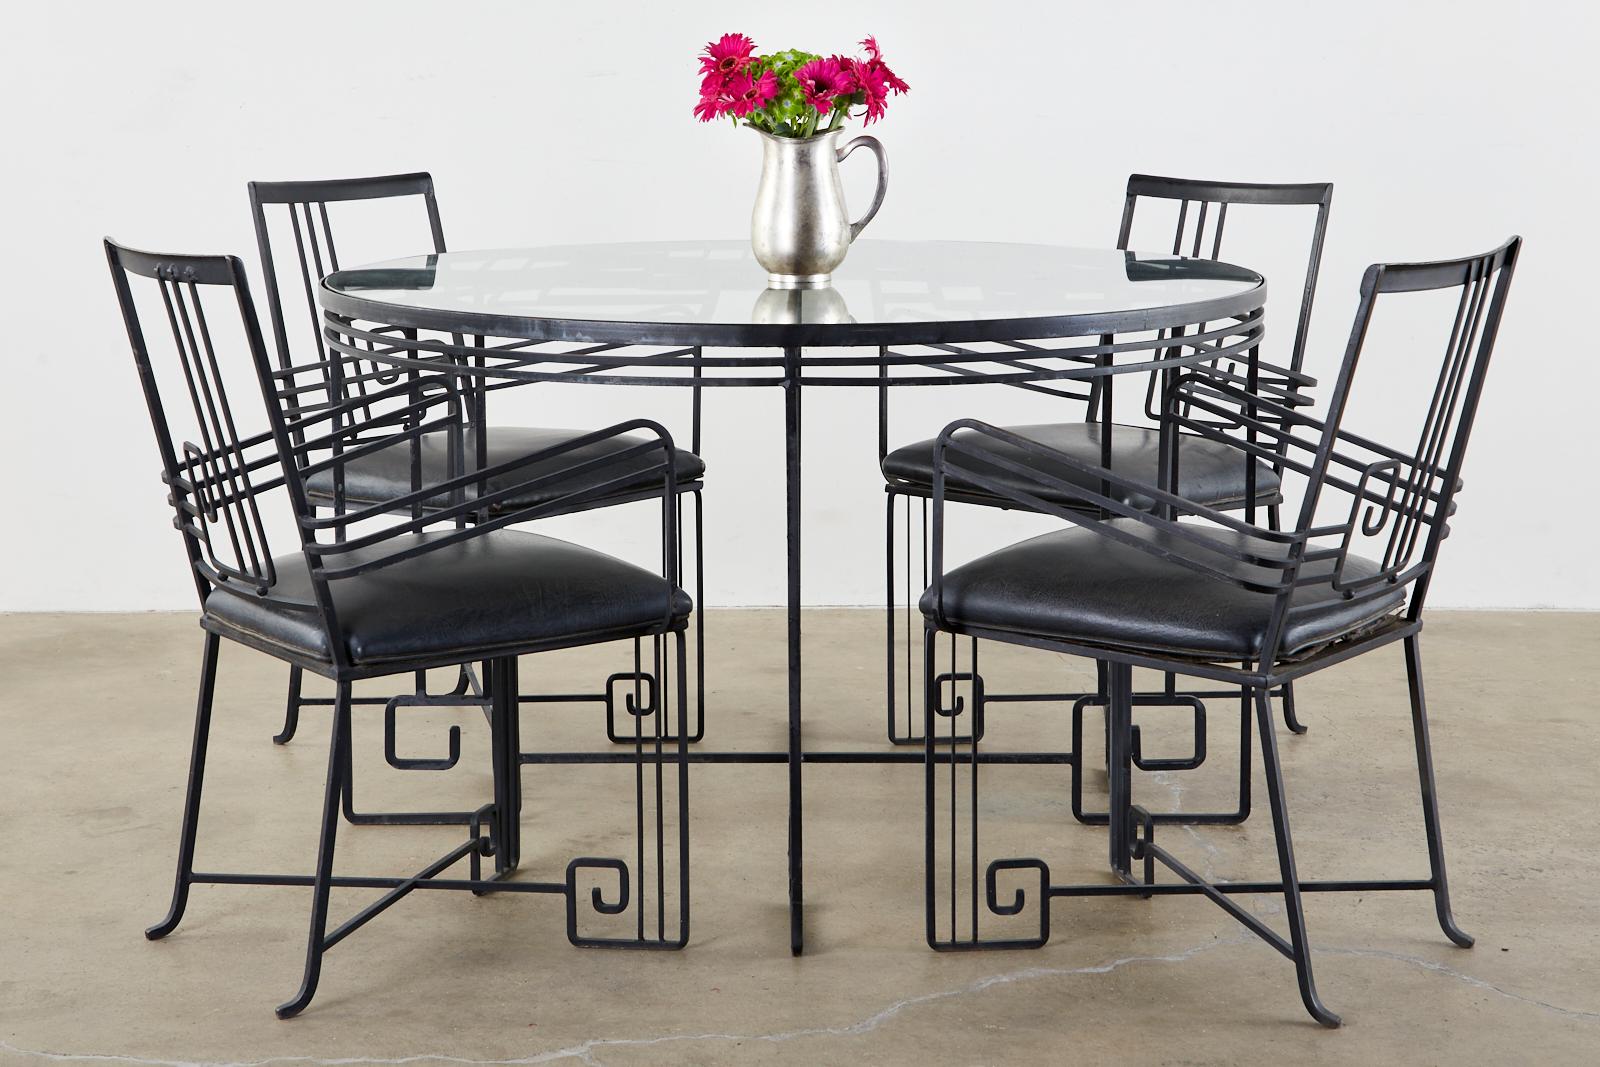 Unique wrought iron garden dining table and chairs crafted in the Art Deco taste. The set features a neoclassical Greek key motif reminiscent of John Salterini's Mid-Century Modern designs. The sculptural style showcases the thin line iron frames